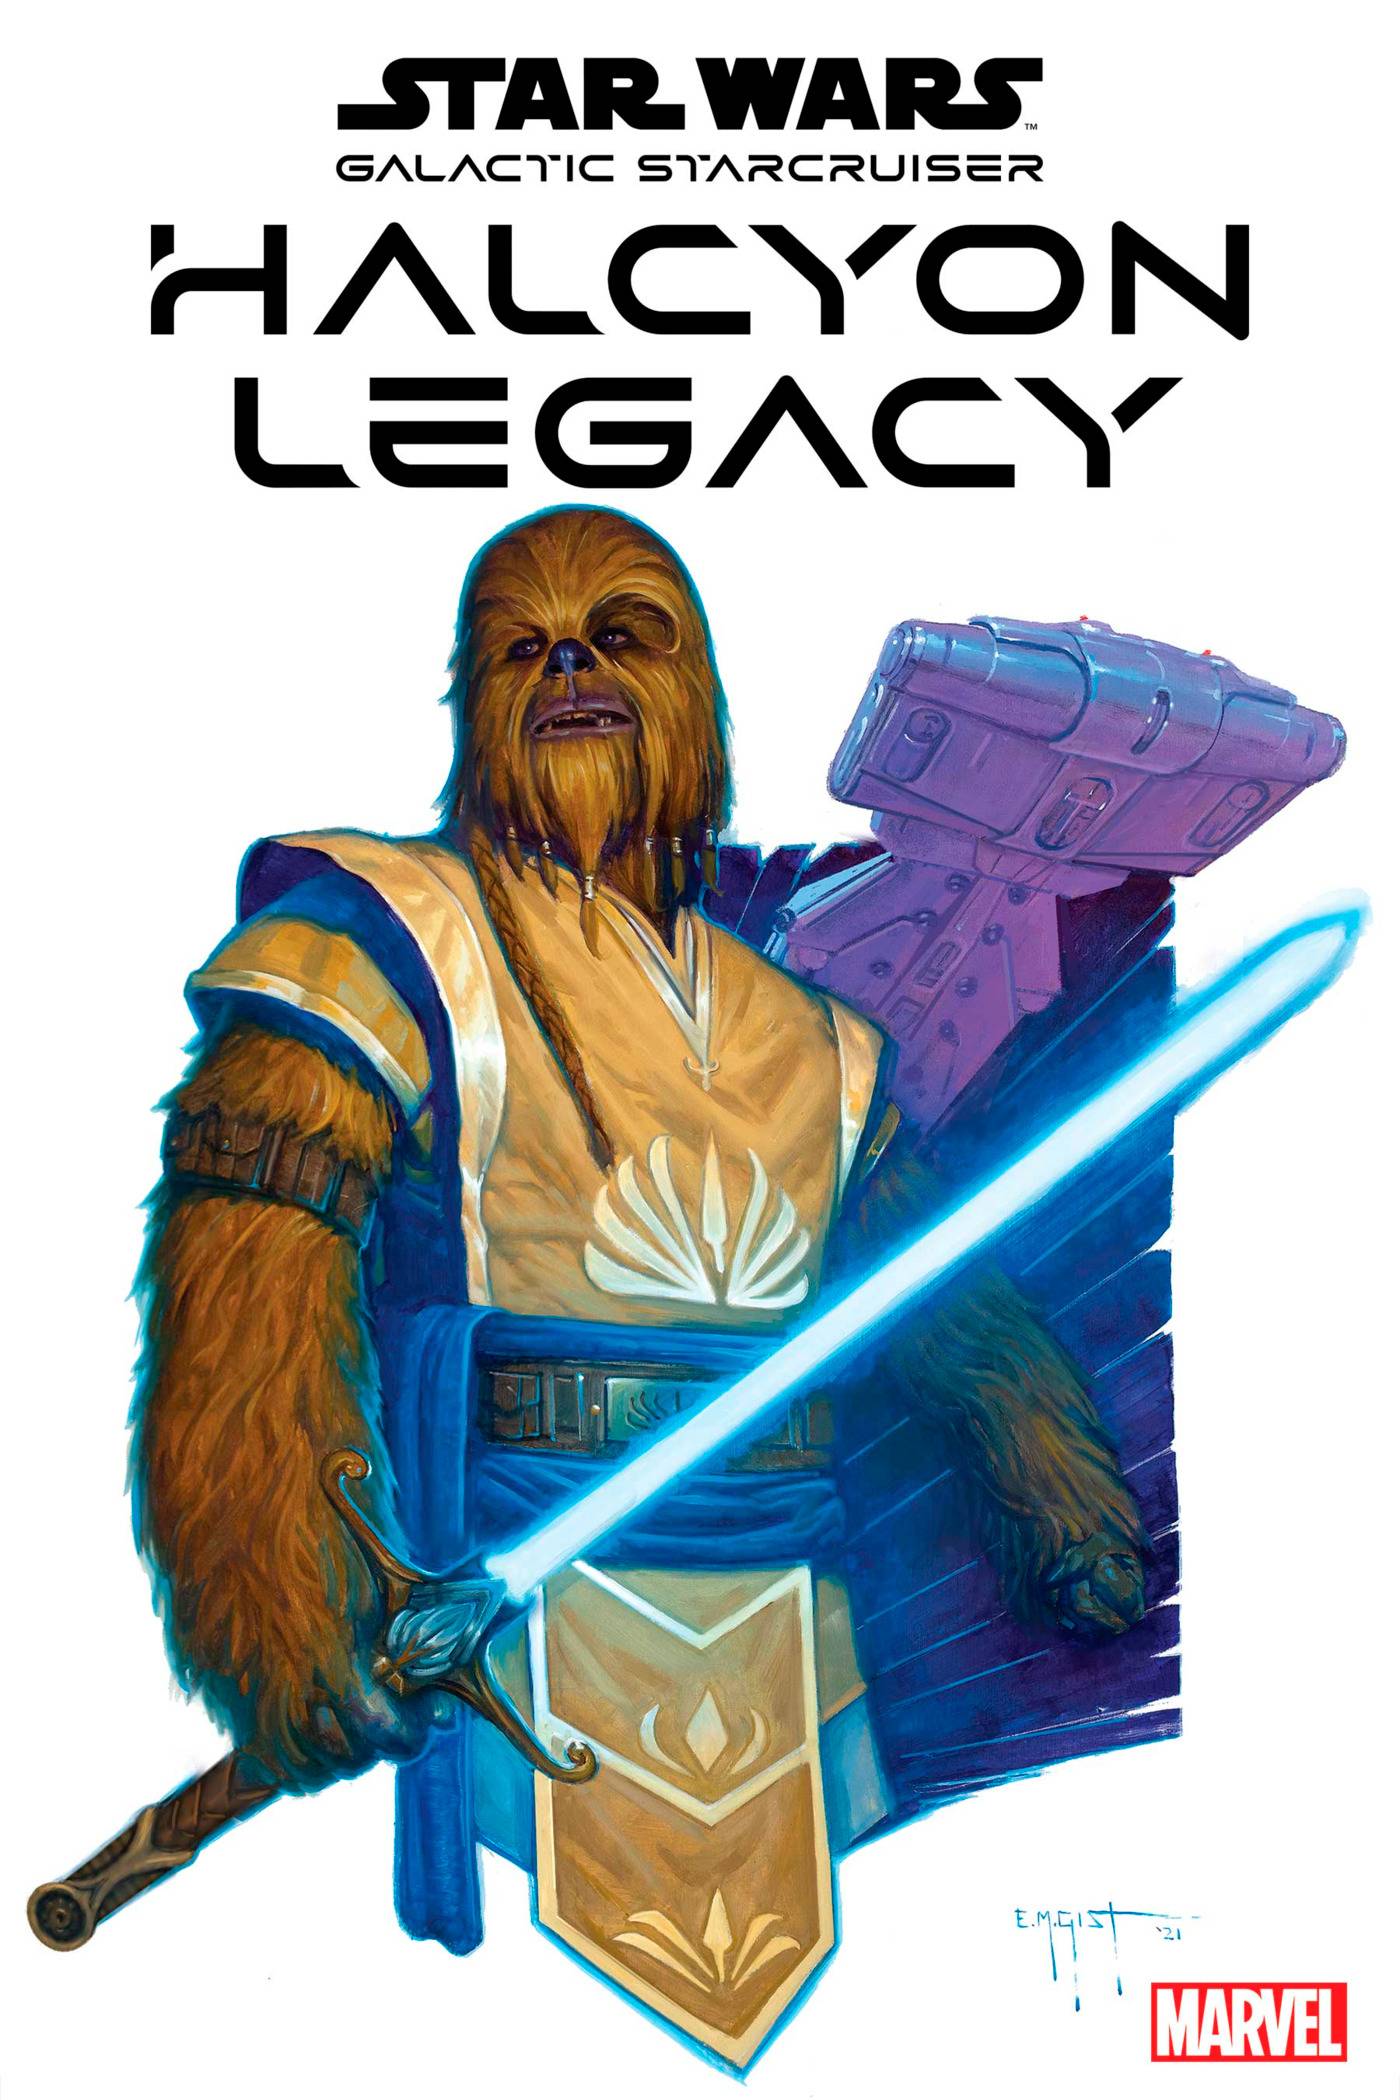 STAR WARS HALCYON LEGACY #1 (OF 5)